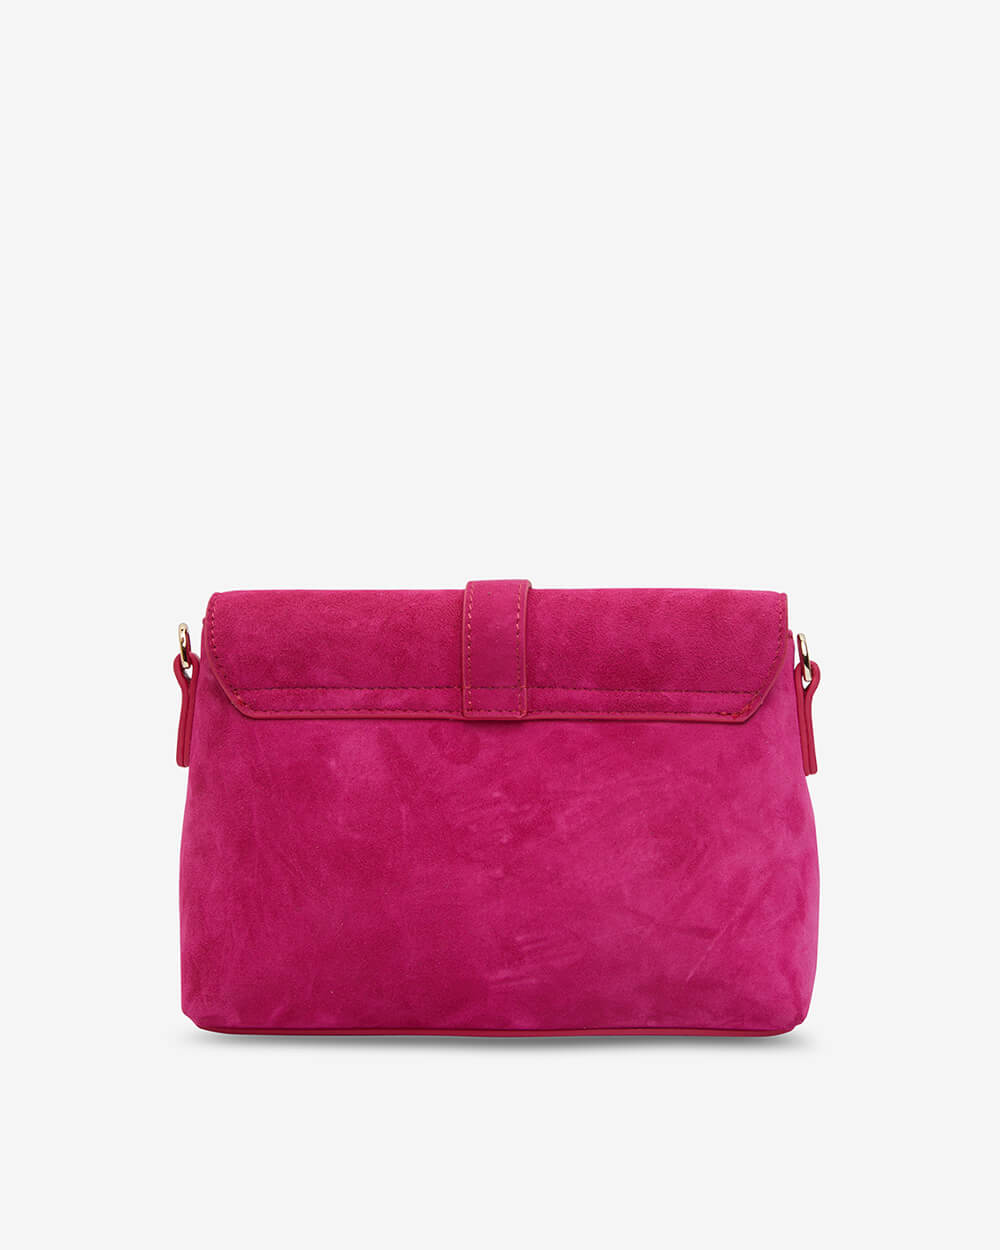 Mini Audrey - Hot Pink Suede